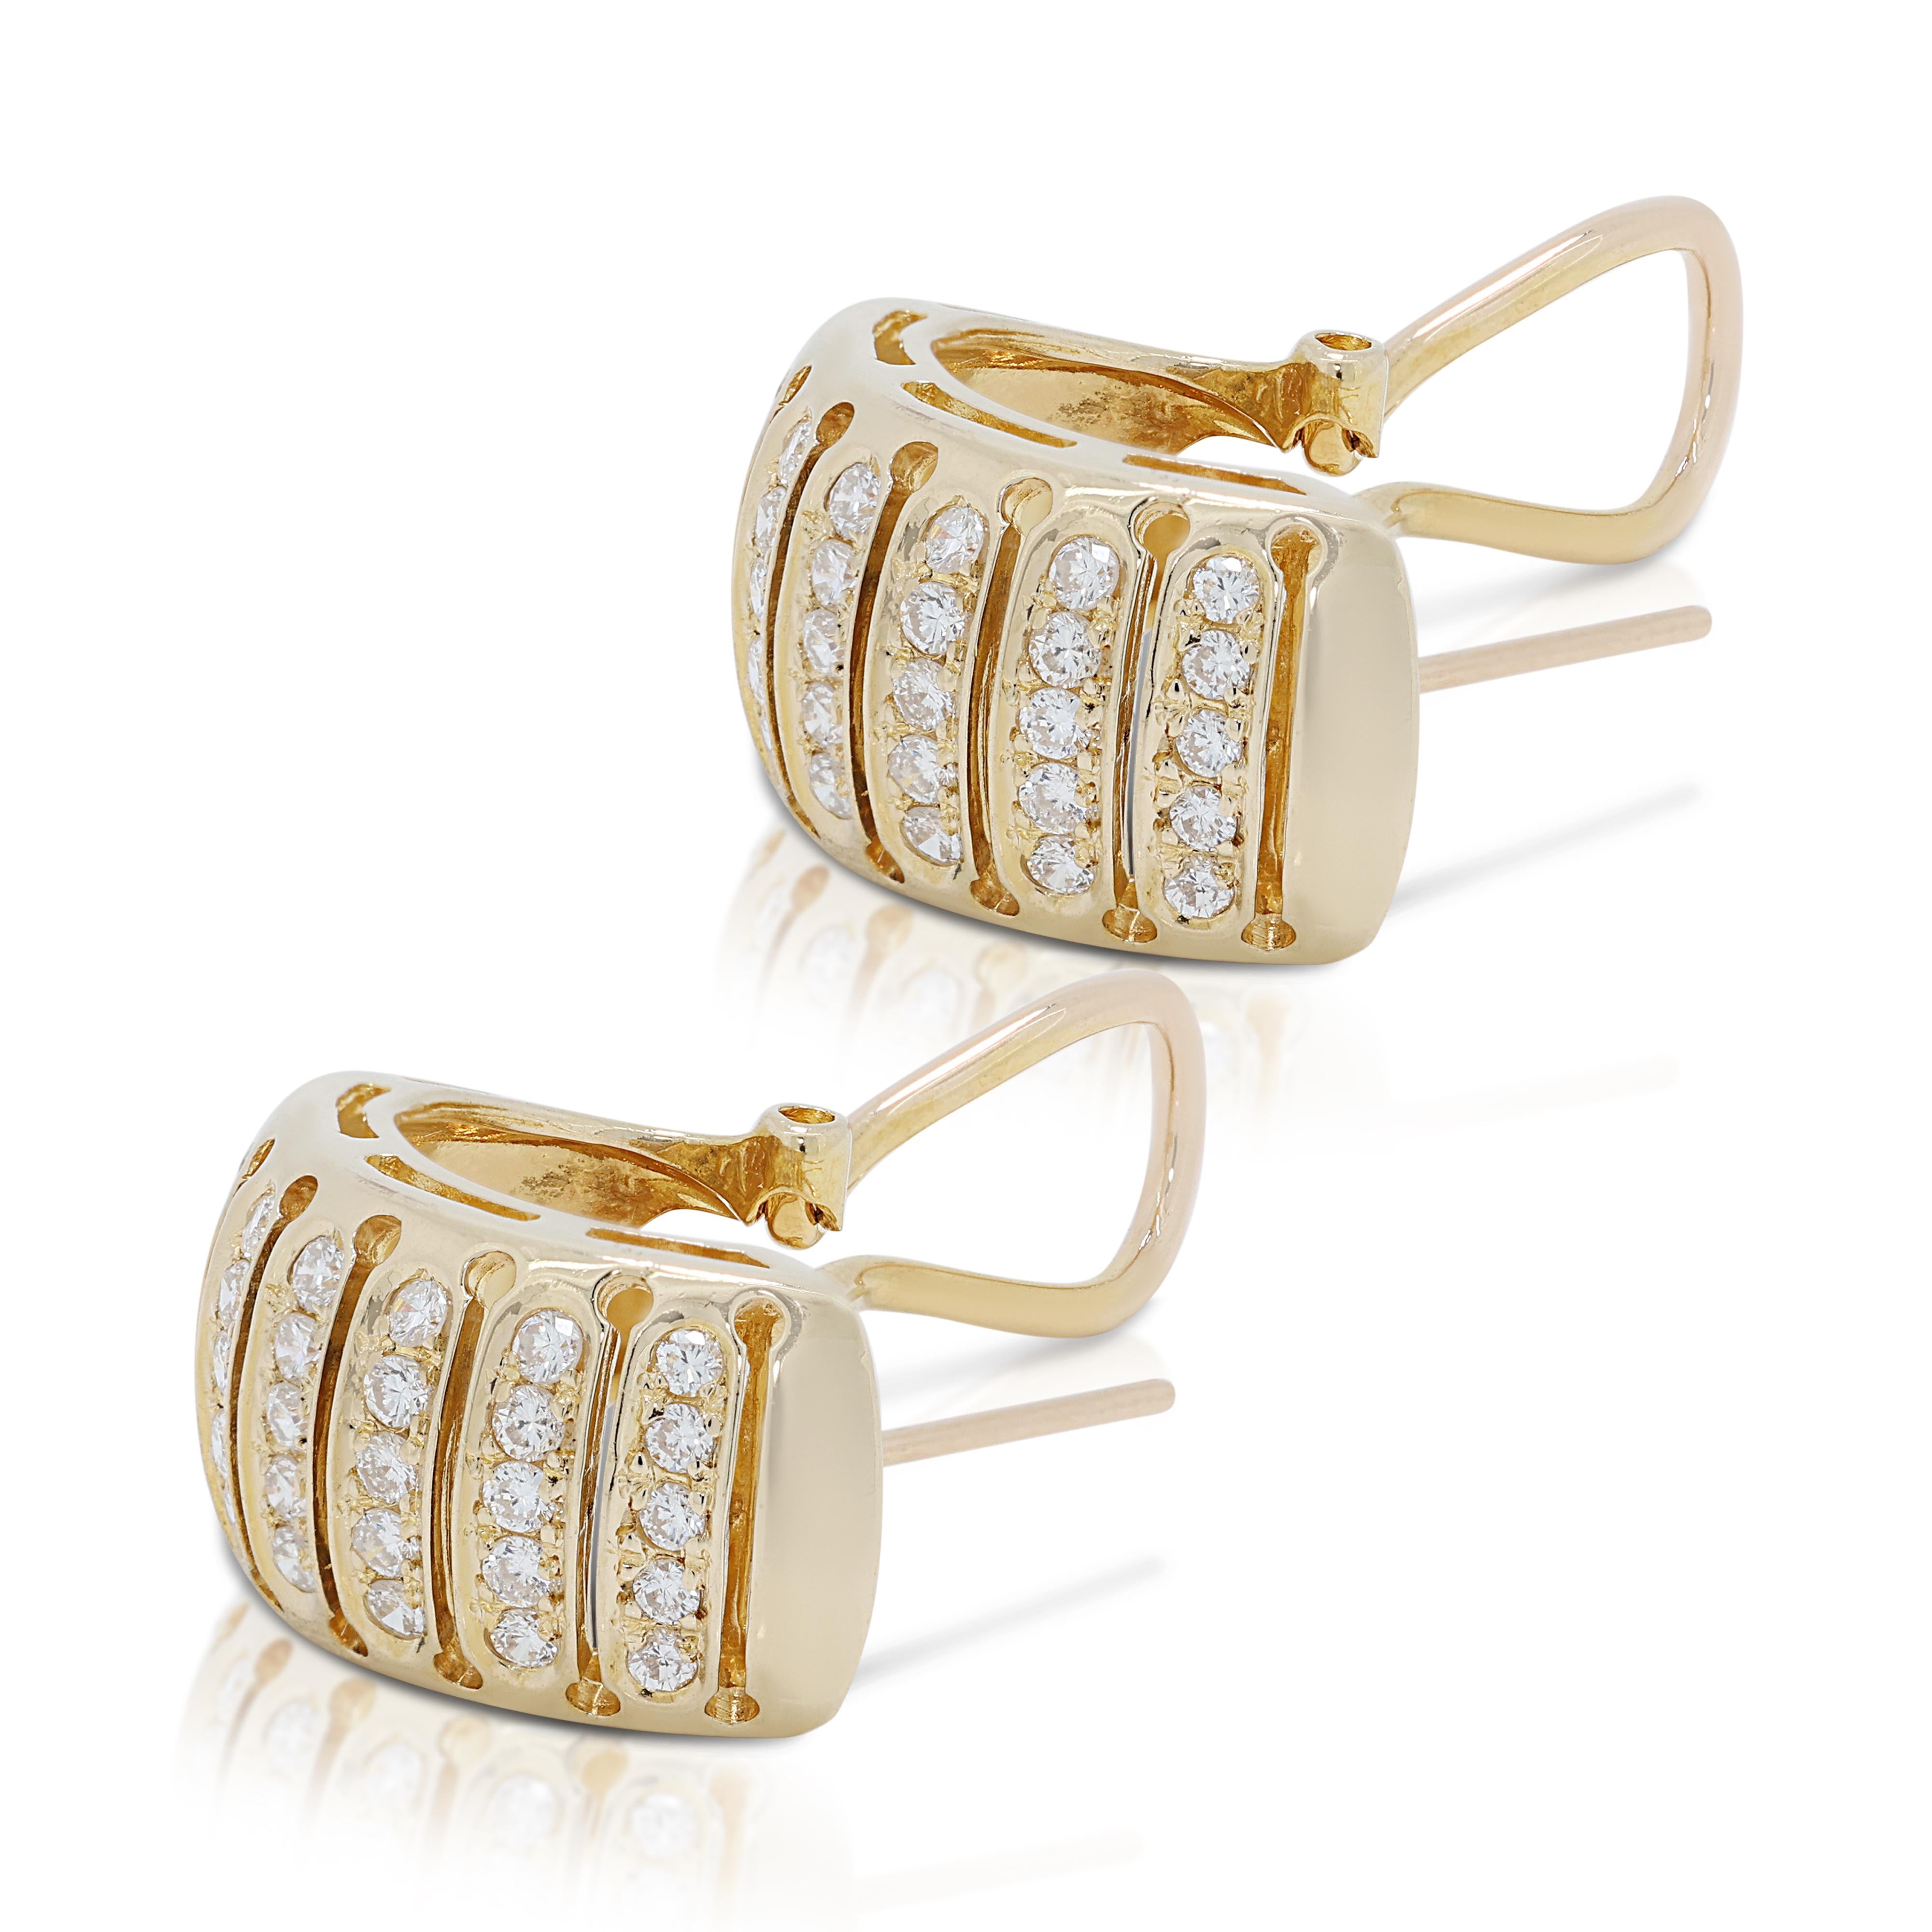 Indulge in timeless elegance with these stunning diamond earrings, crafted in gleaming 18k yellow gold. Each meticulously cut diamond boasts a captivating 0.42 carat round brilliant shape, showcasing a near-colorless grade reflecting exceptional